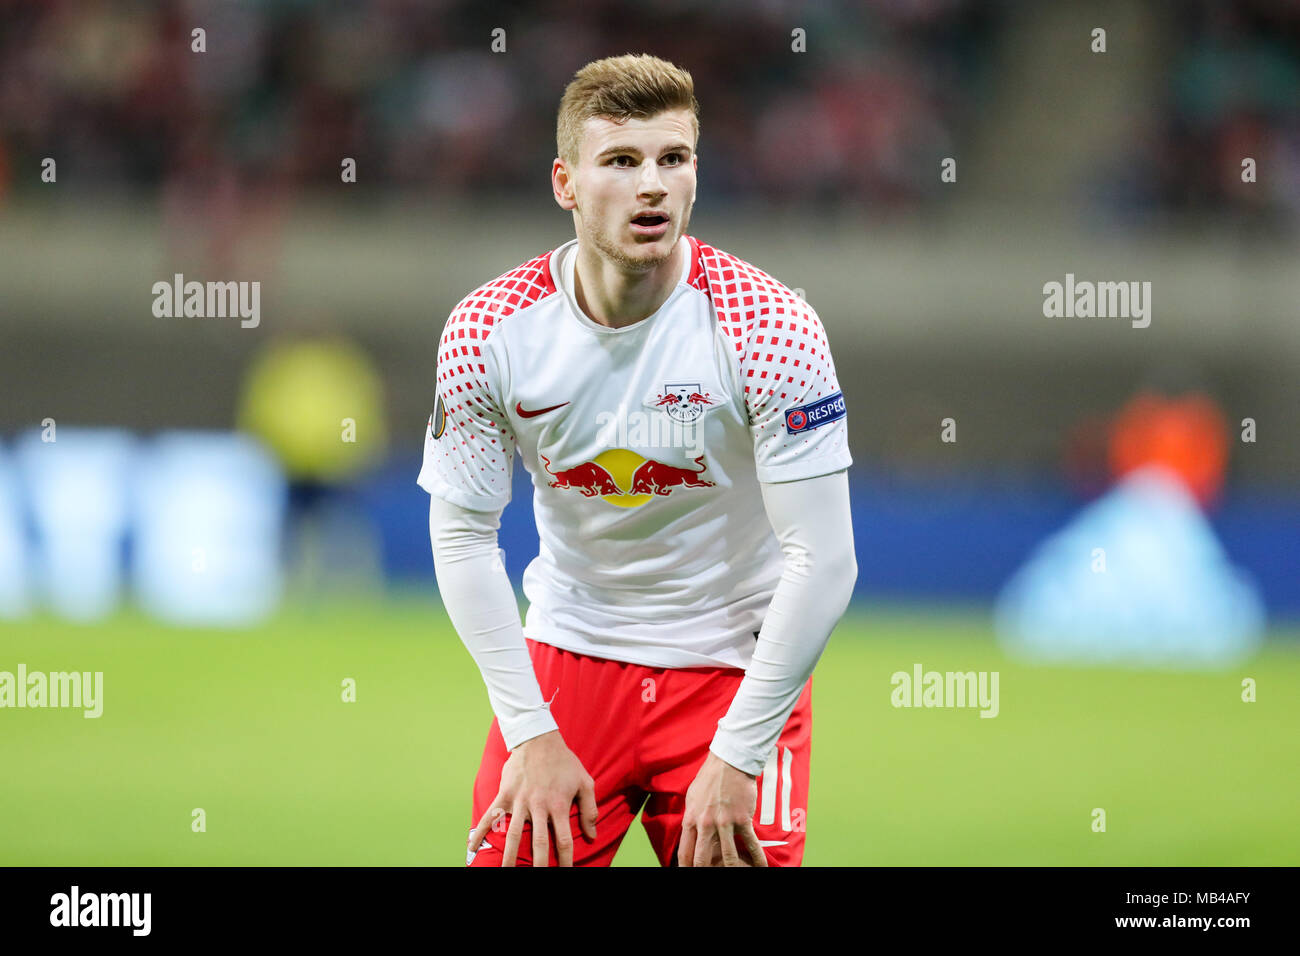 05 April 2018, Germany, Leipzig, Soccer, Europe League, Quarterfinals, RB Leipzig vs. Olympique Marseille at the Red Bull Arena: Leipzig's player Timo Werner. Photo: Jan Woitas/dpa-Zentralbild/dpa Stock Photo